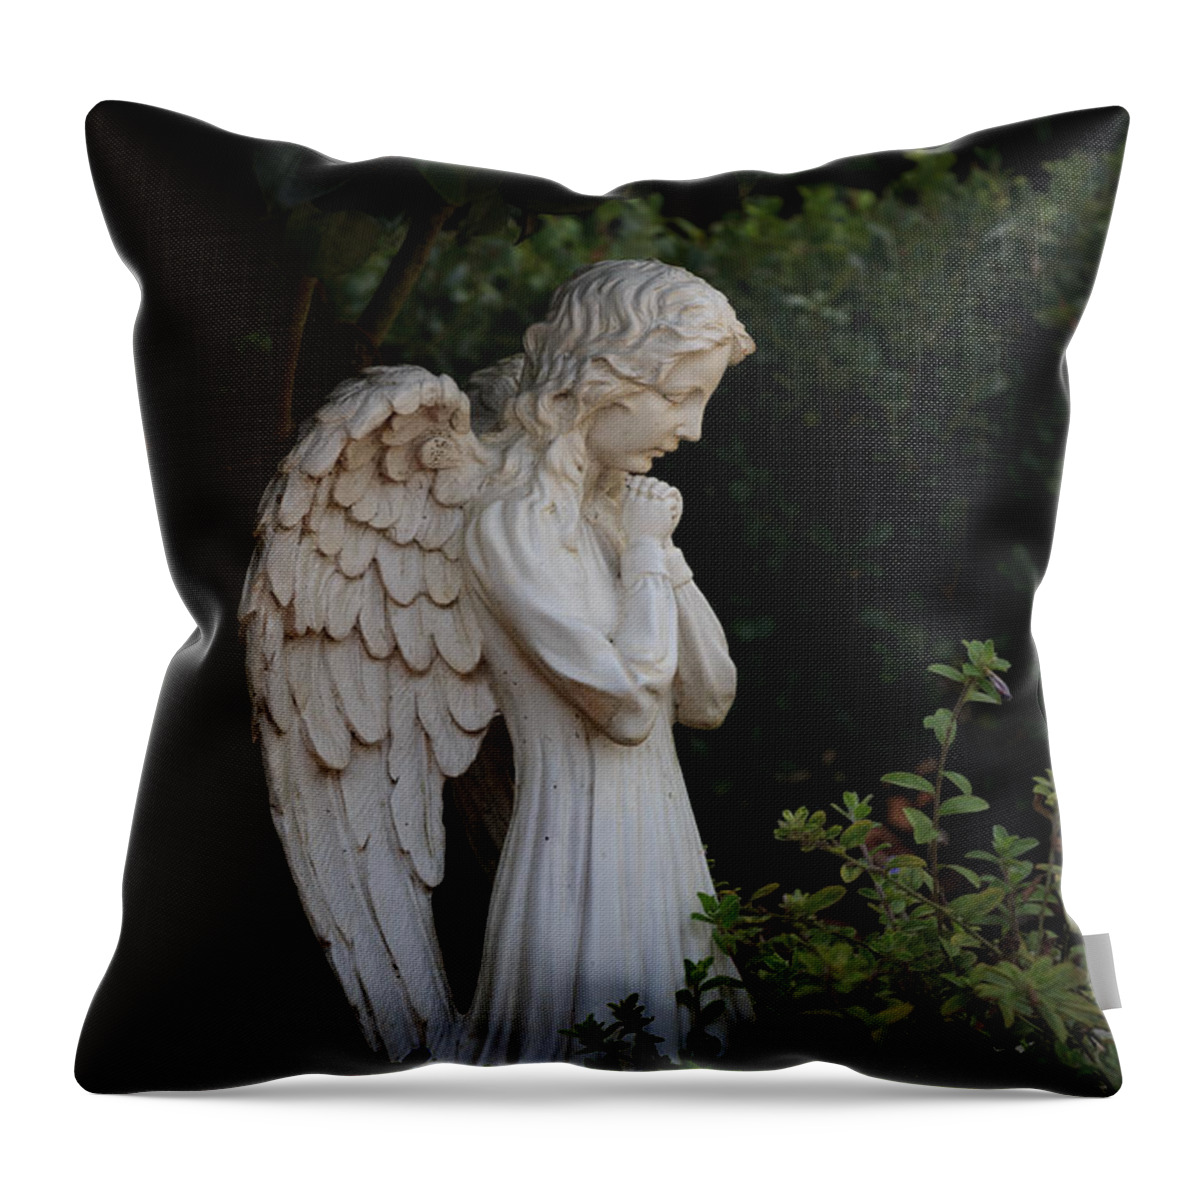 Gardens Throw Pillow featuring the photograph Kneeling Angel by Kathleen Scanlan